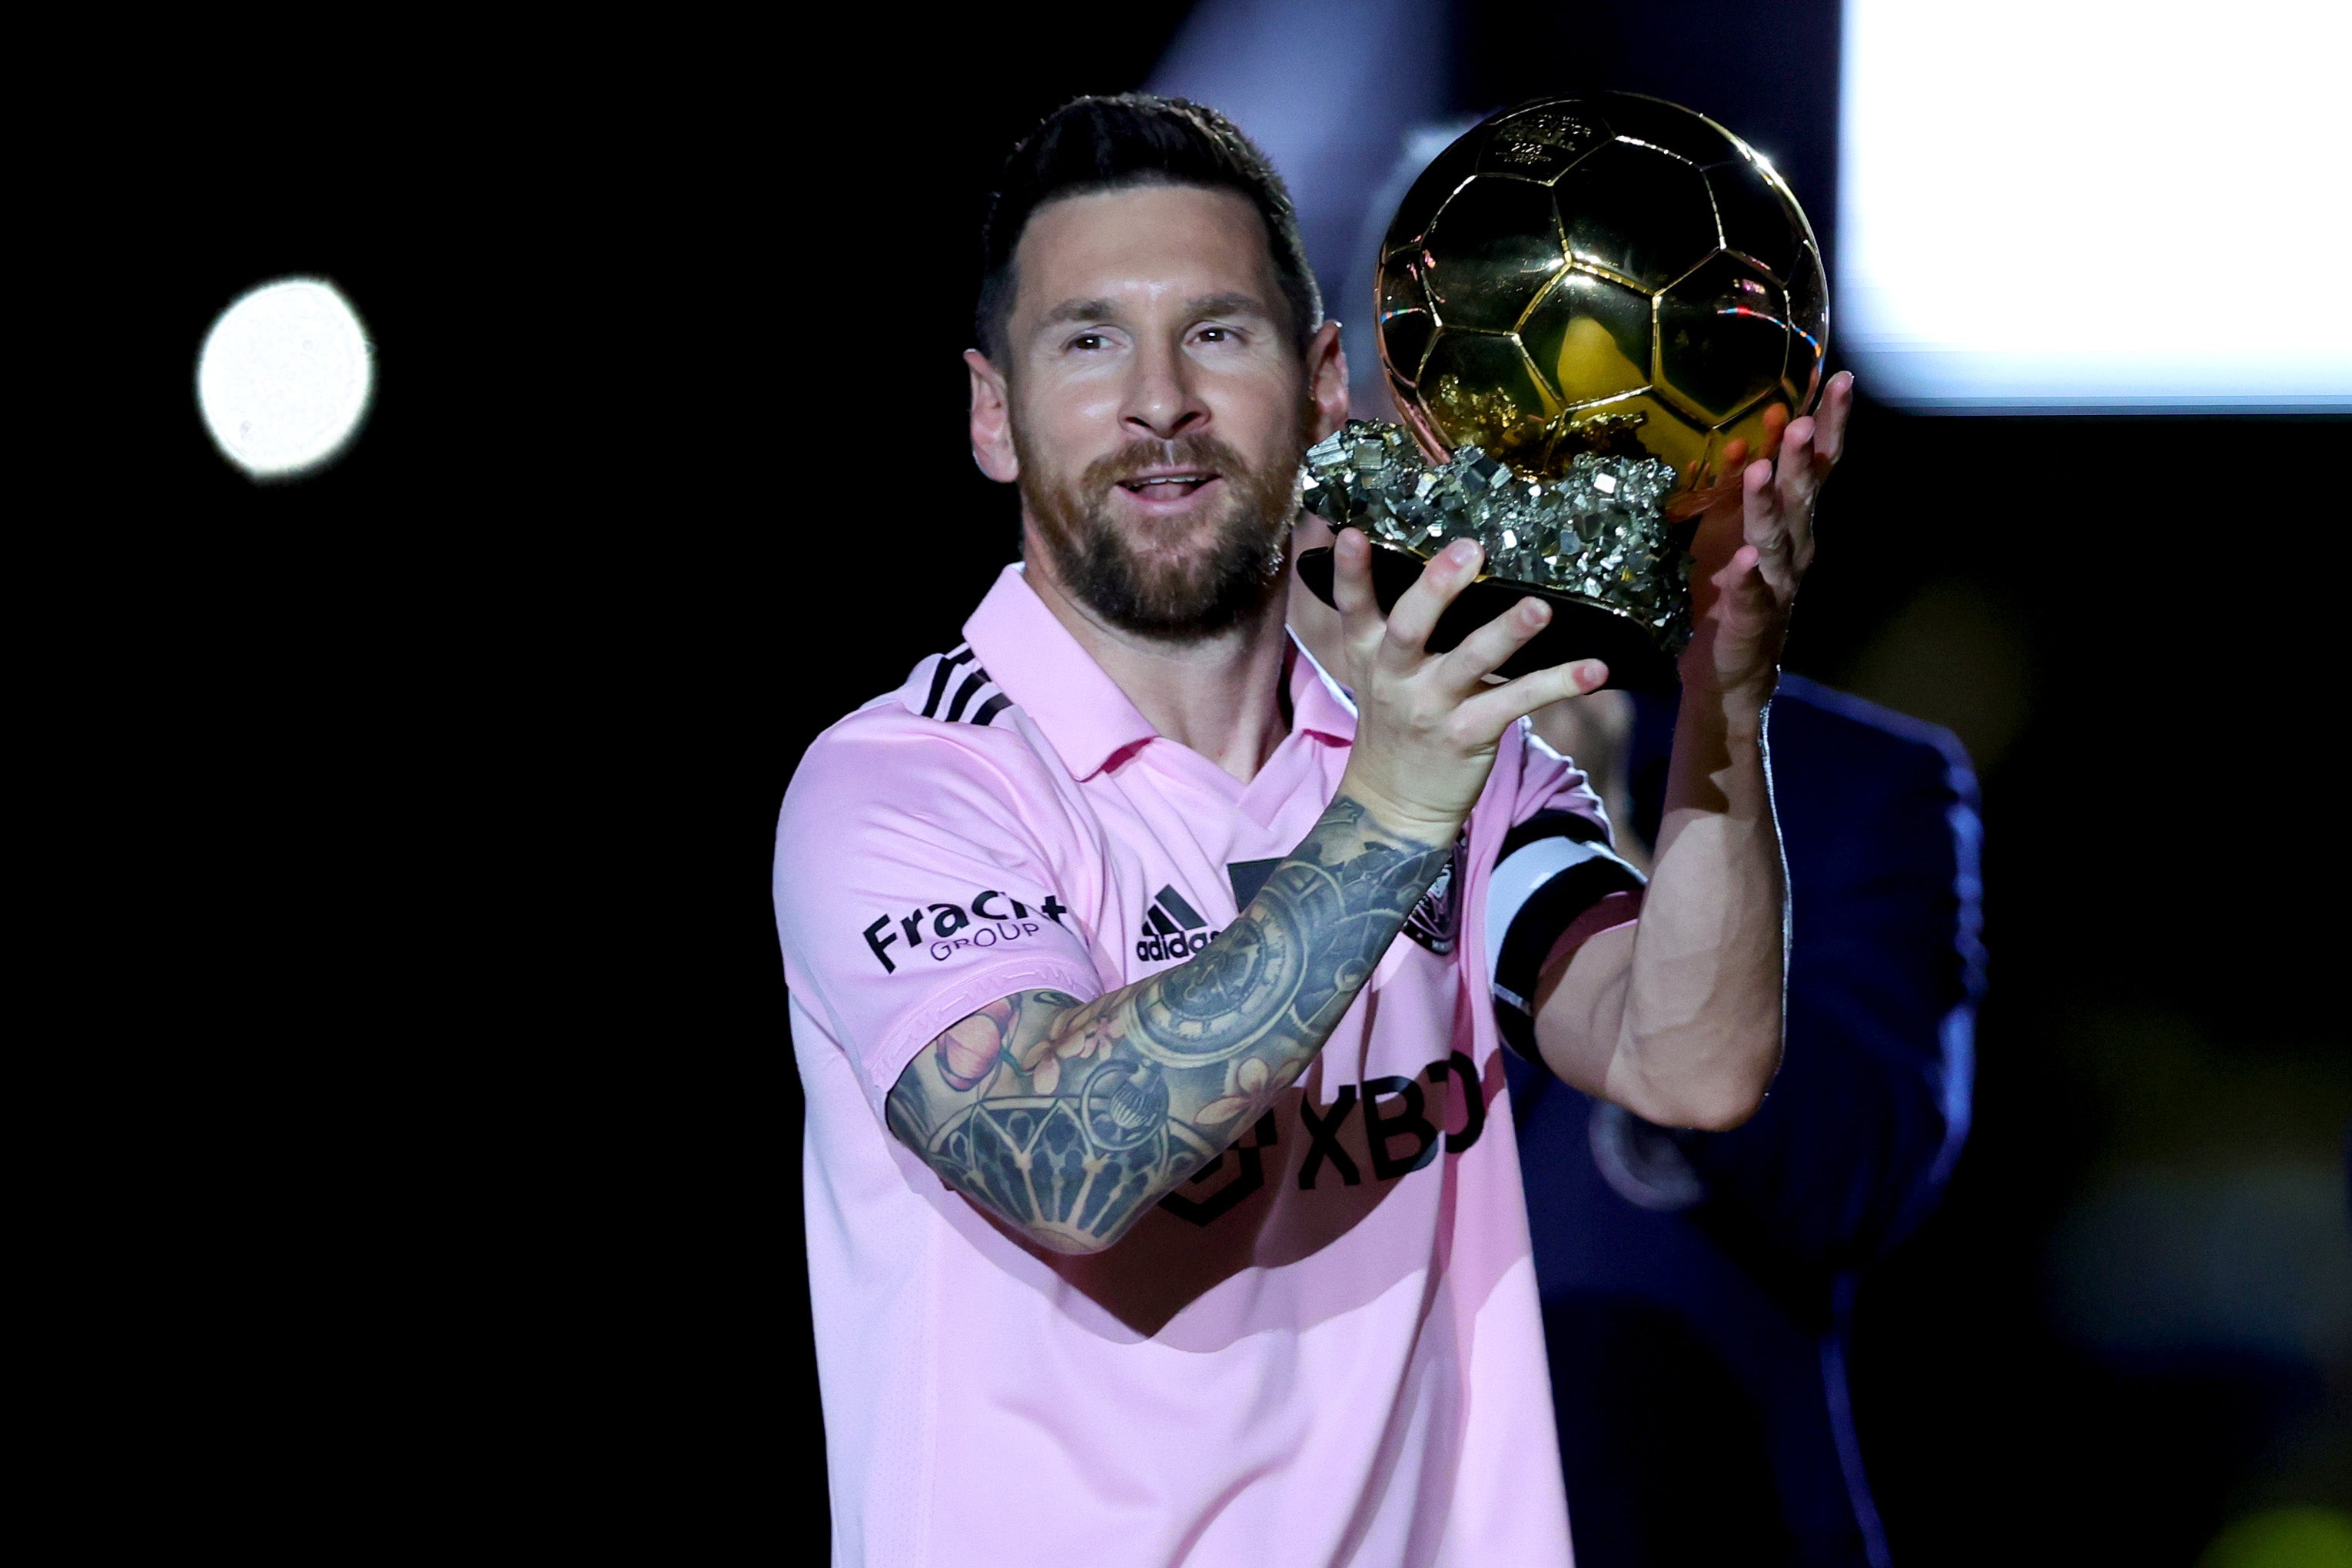 Lionel Messi captured his eighth Ballon d’Or trophy in October